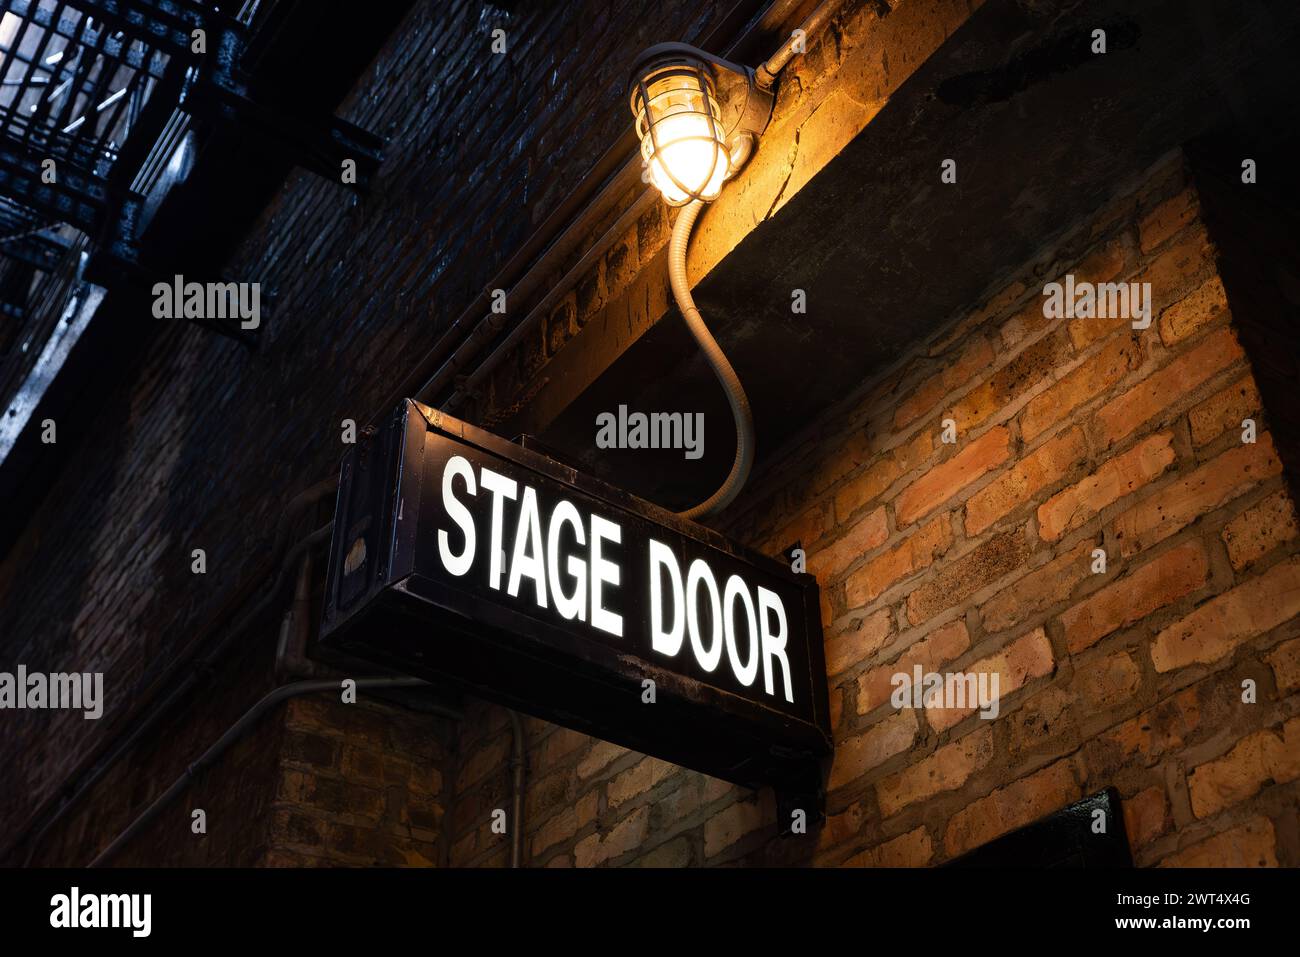 Stage door sign in downtown Chicago alley. Stock Photo